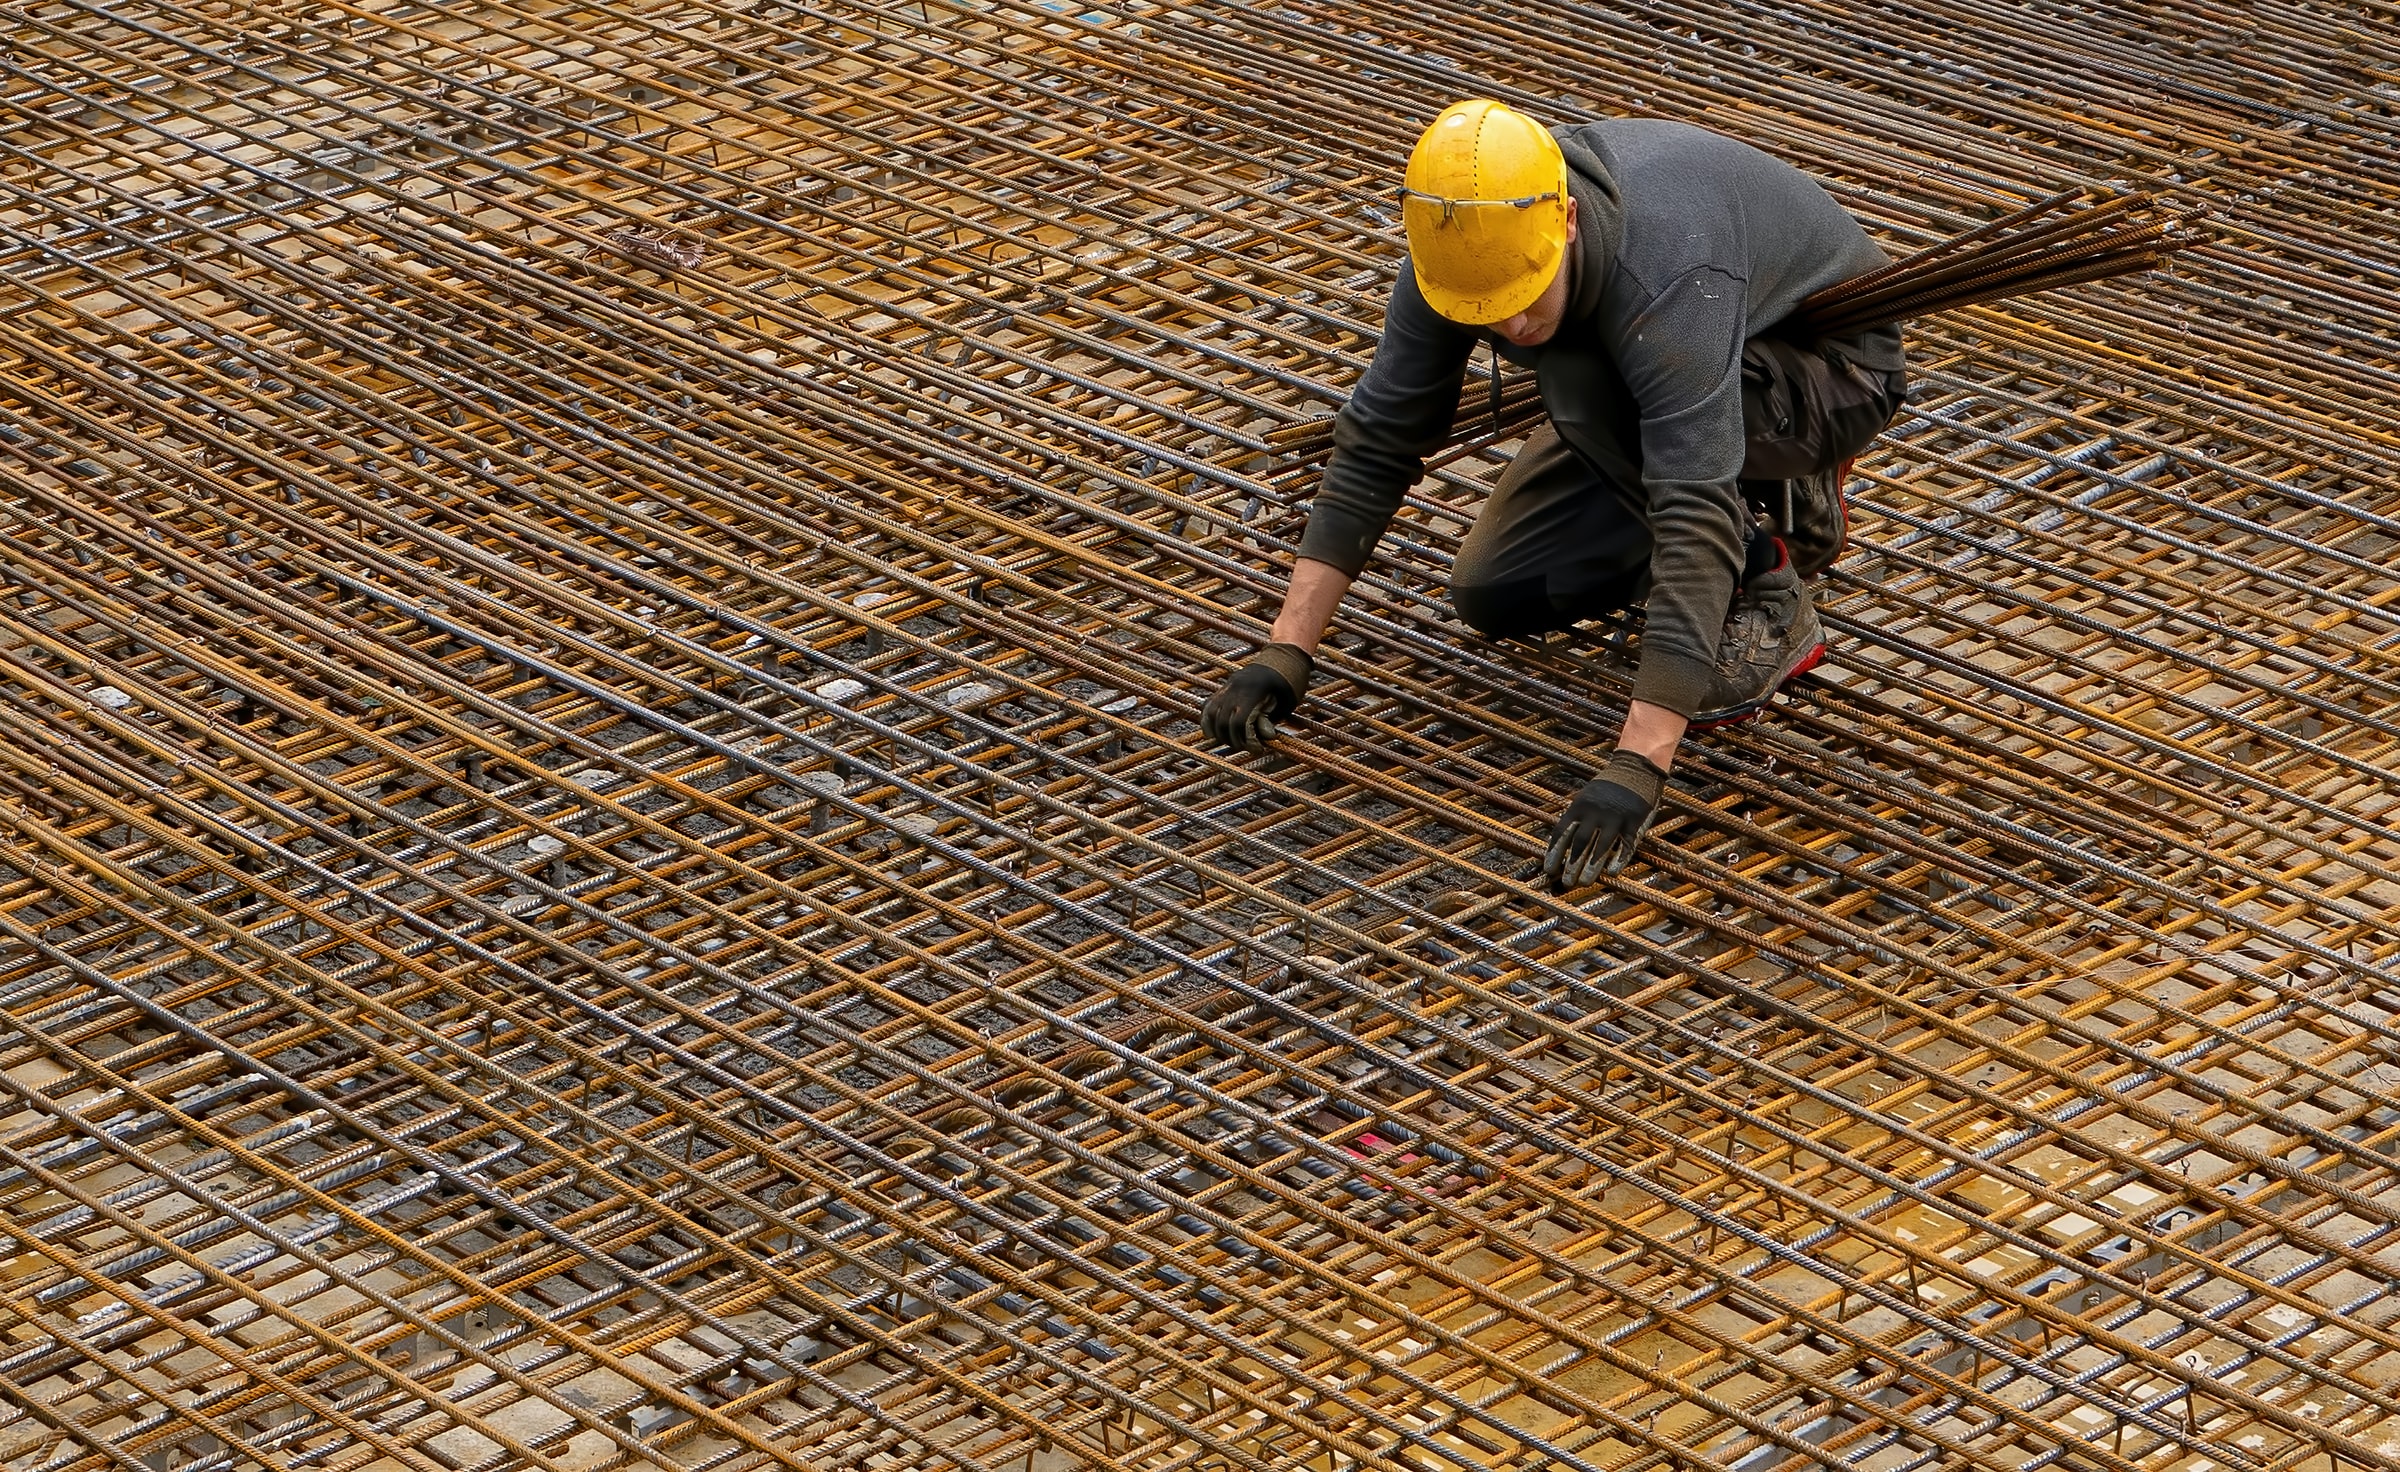 A construction worker handling rebar, the lowest quality and profit margin of steel products. This is what mini mills first produced.